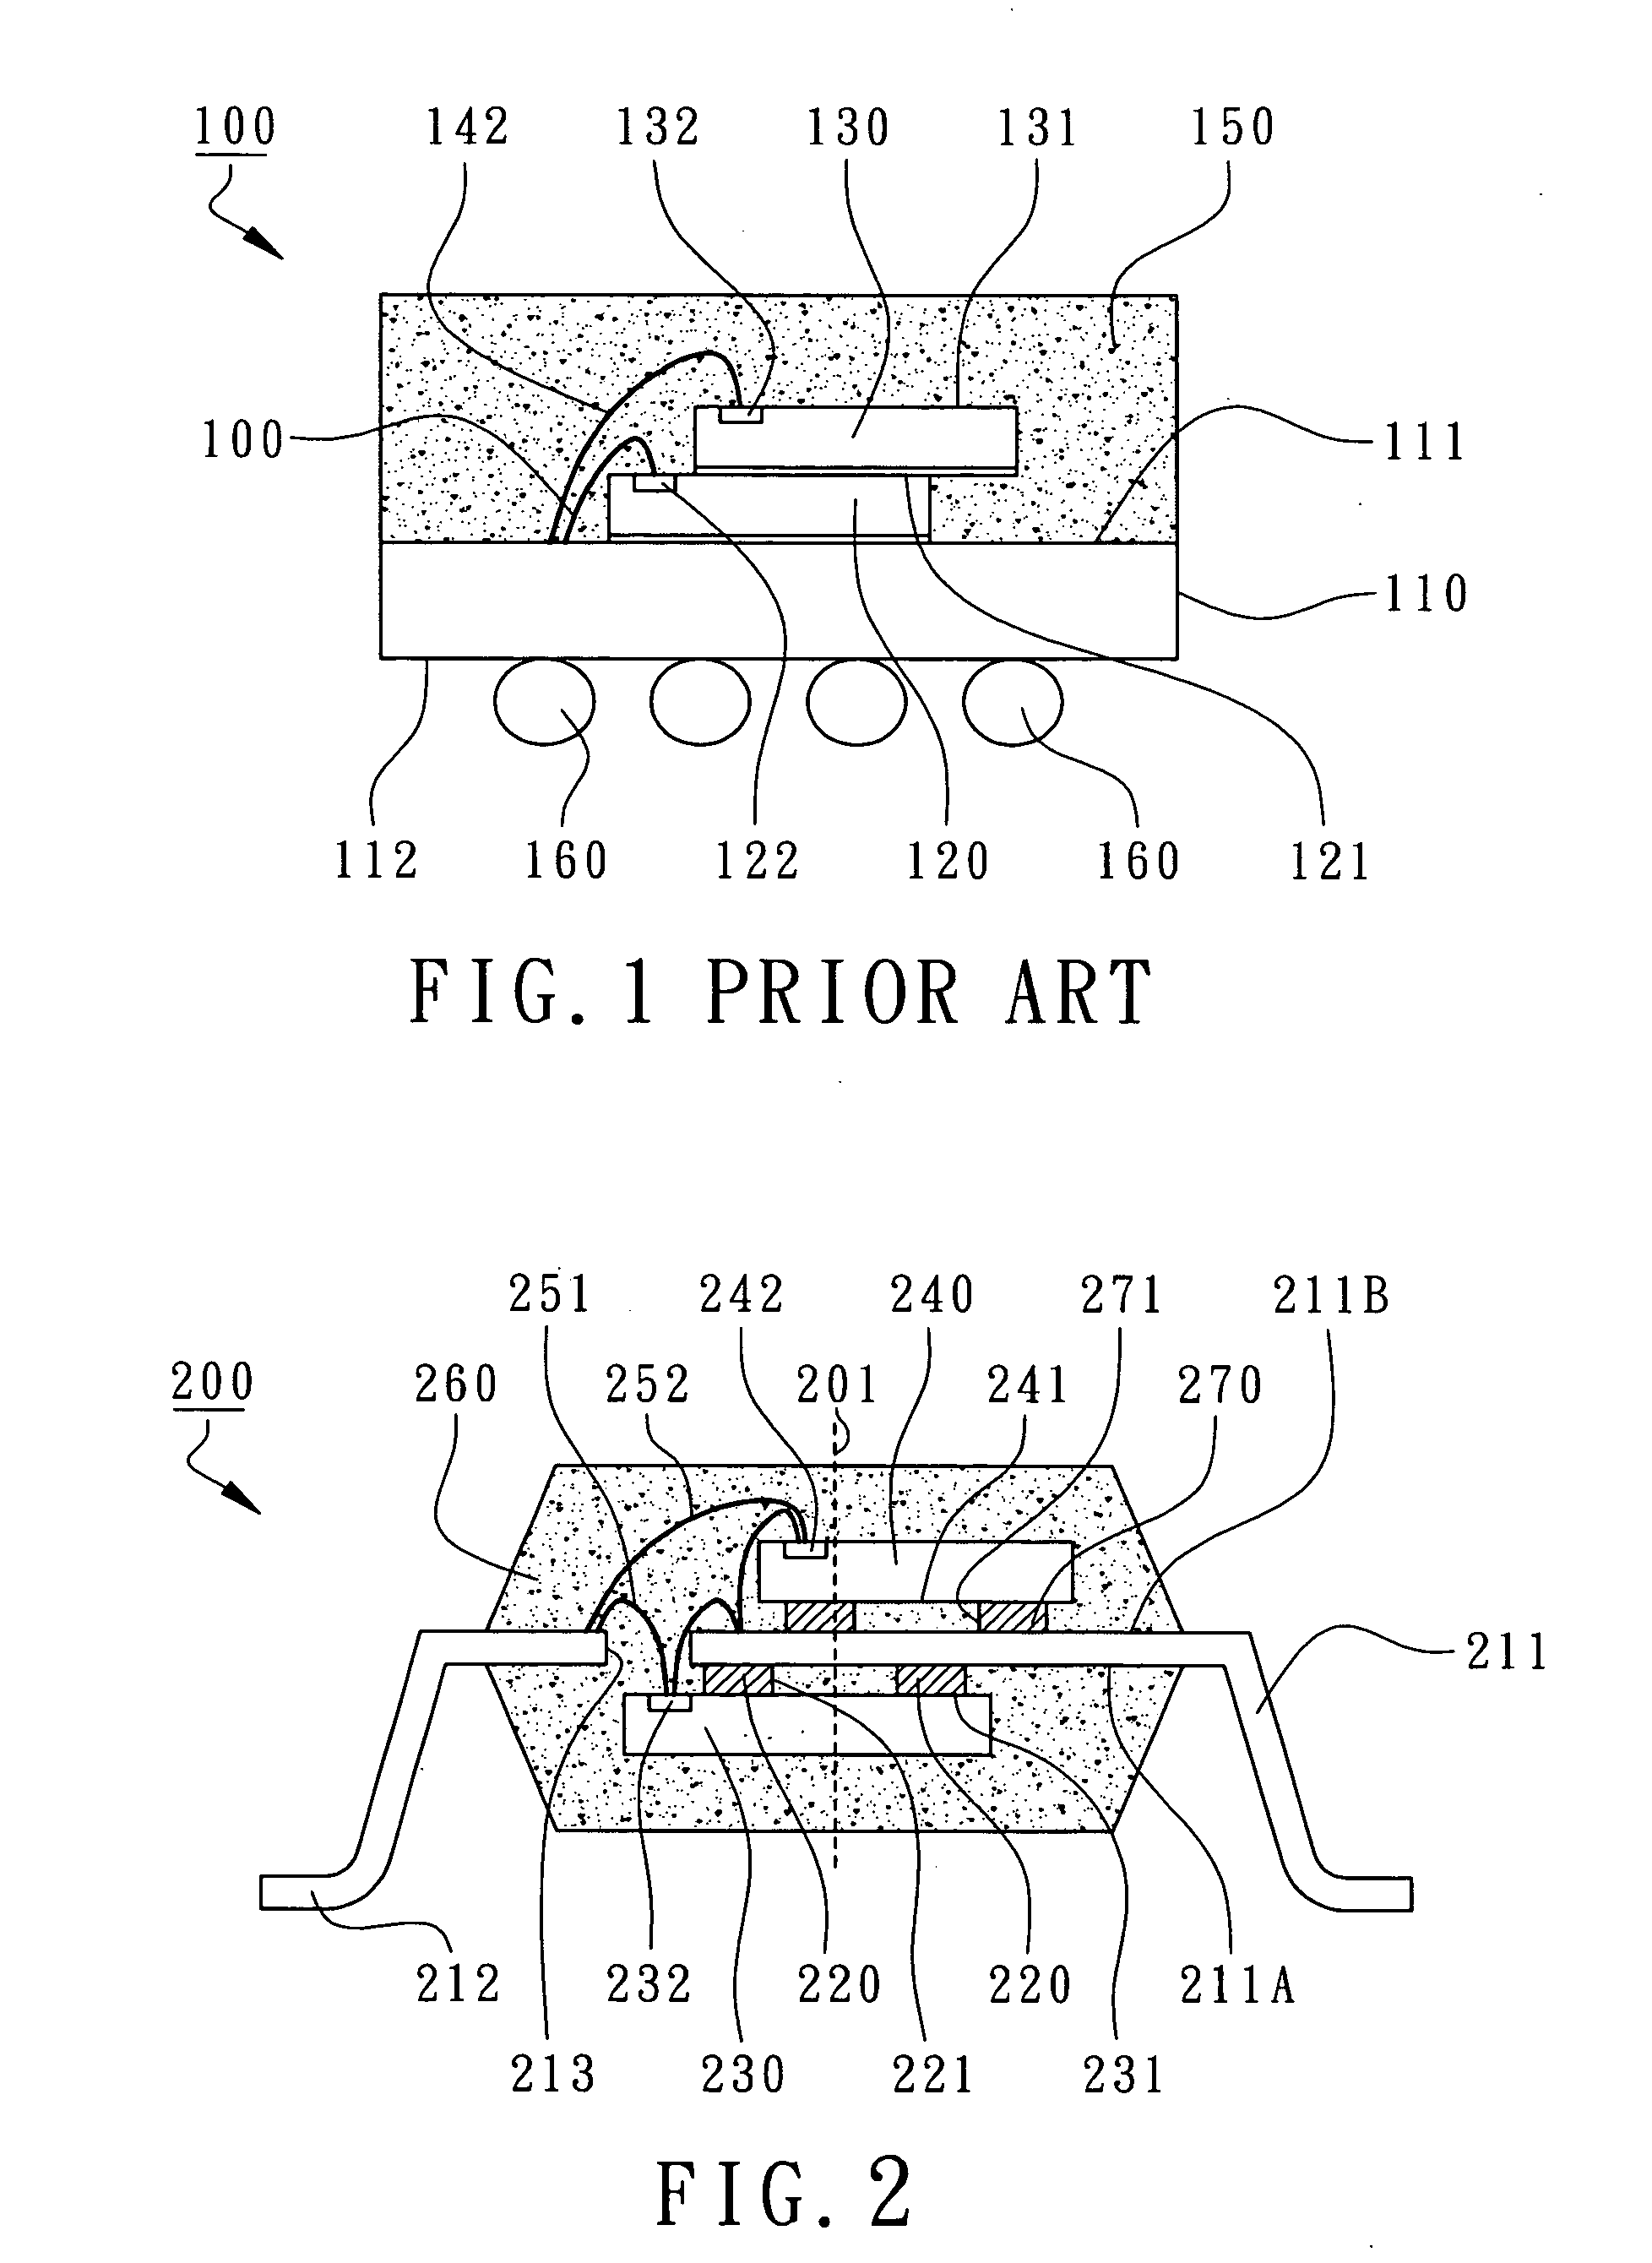 IC package encapsulating a chip under asymmetric single-side leads